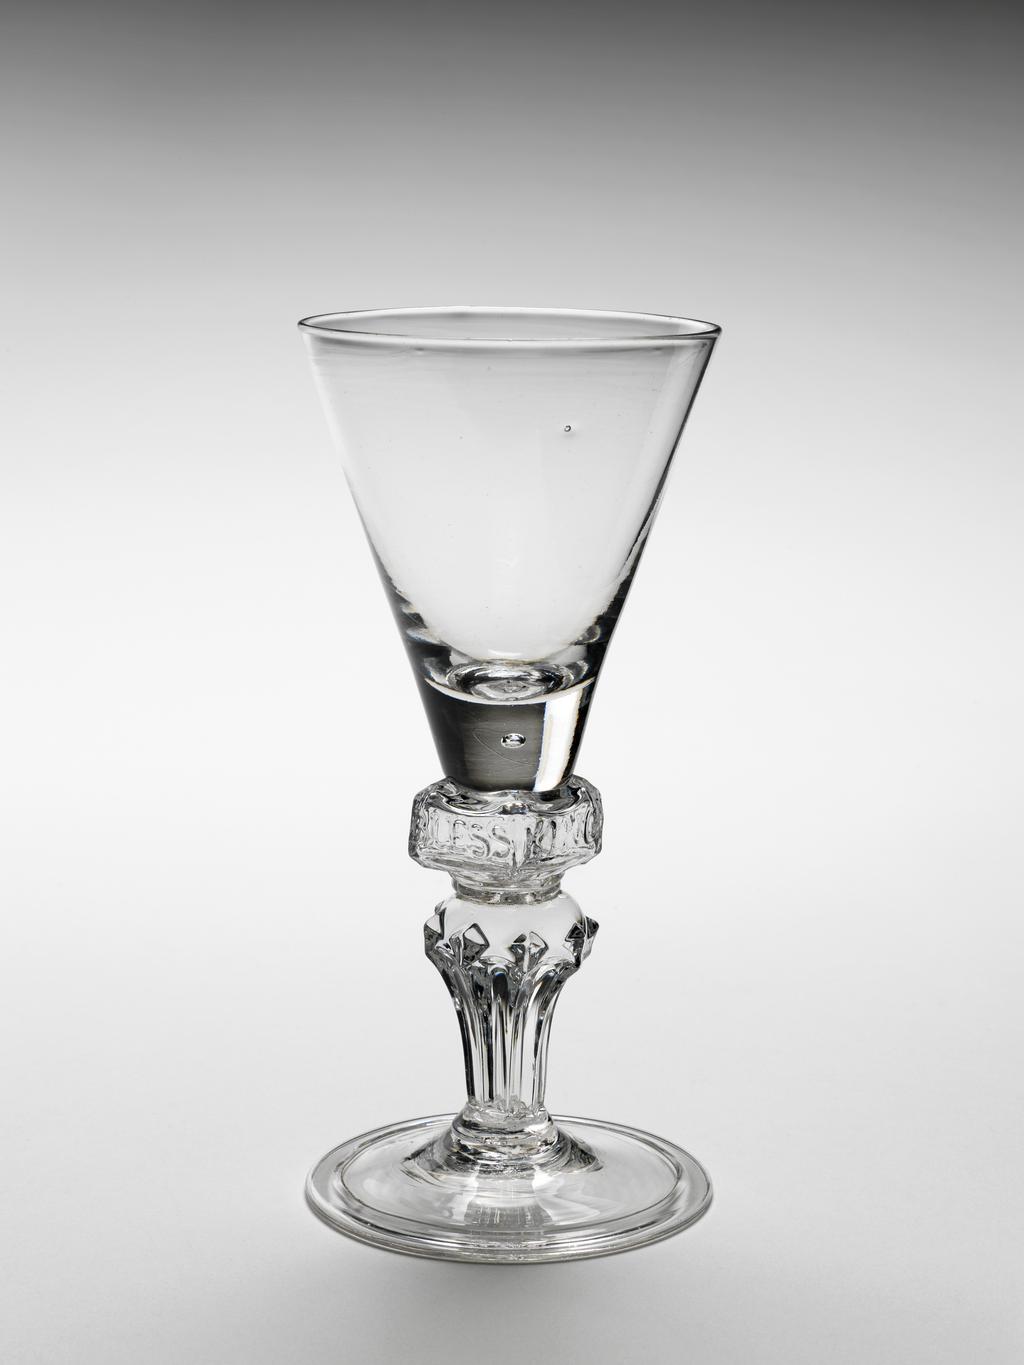 An image of Wine glass. Funnel bowl on square knop moulded 'GOD SAVE KING GEORGE' on moulded pedestal stem and folded foot. Lead glass, bowl blown, stem moulded with engraved decoration, height 16.0cm, diameter (whole) 7.5cm, circa 1715.